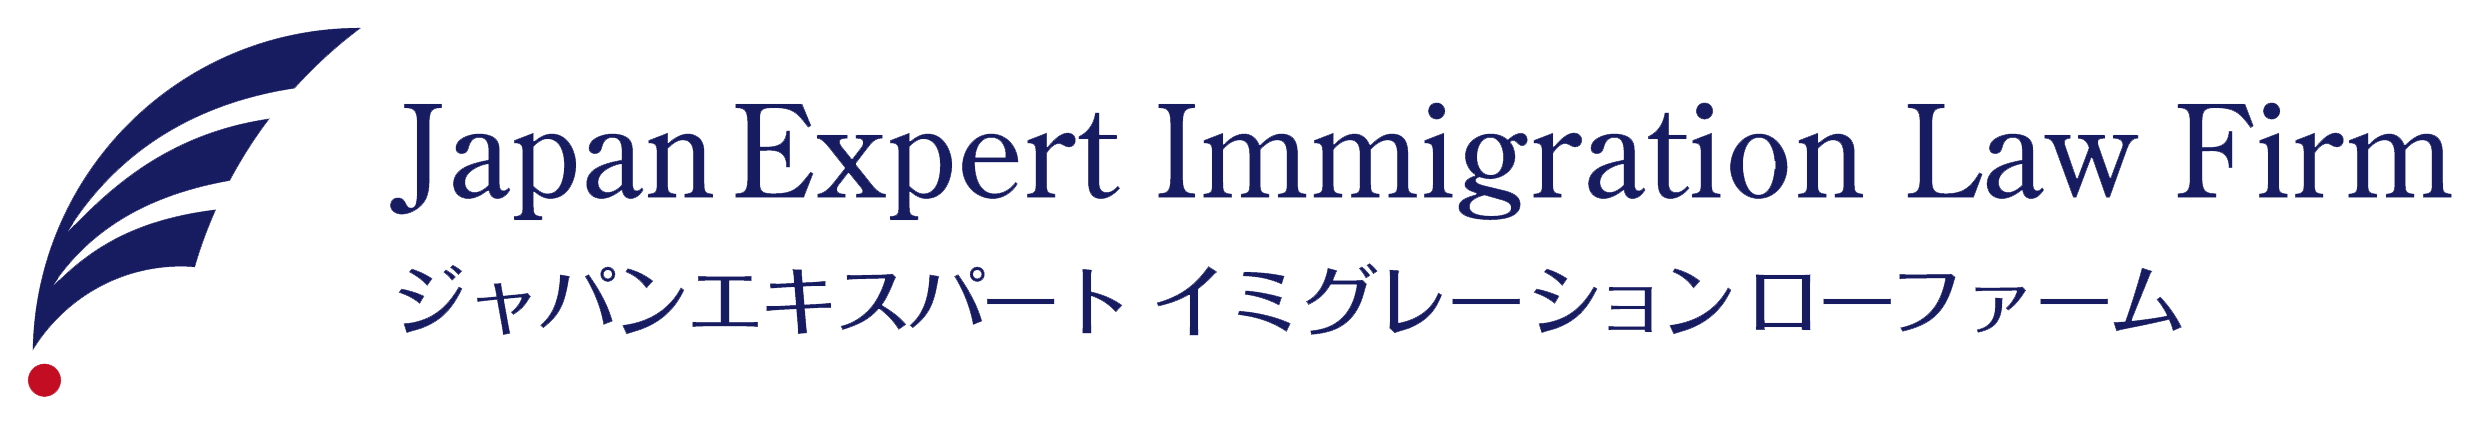 Immigration Lawyers｜行政書士法人Japan Expert Immigration Law Firm